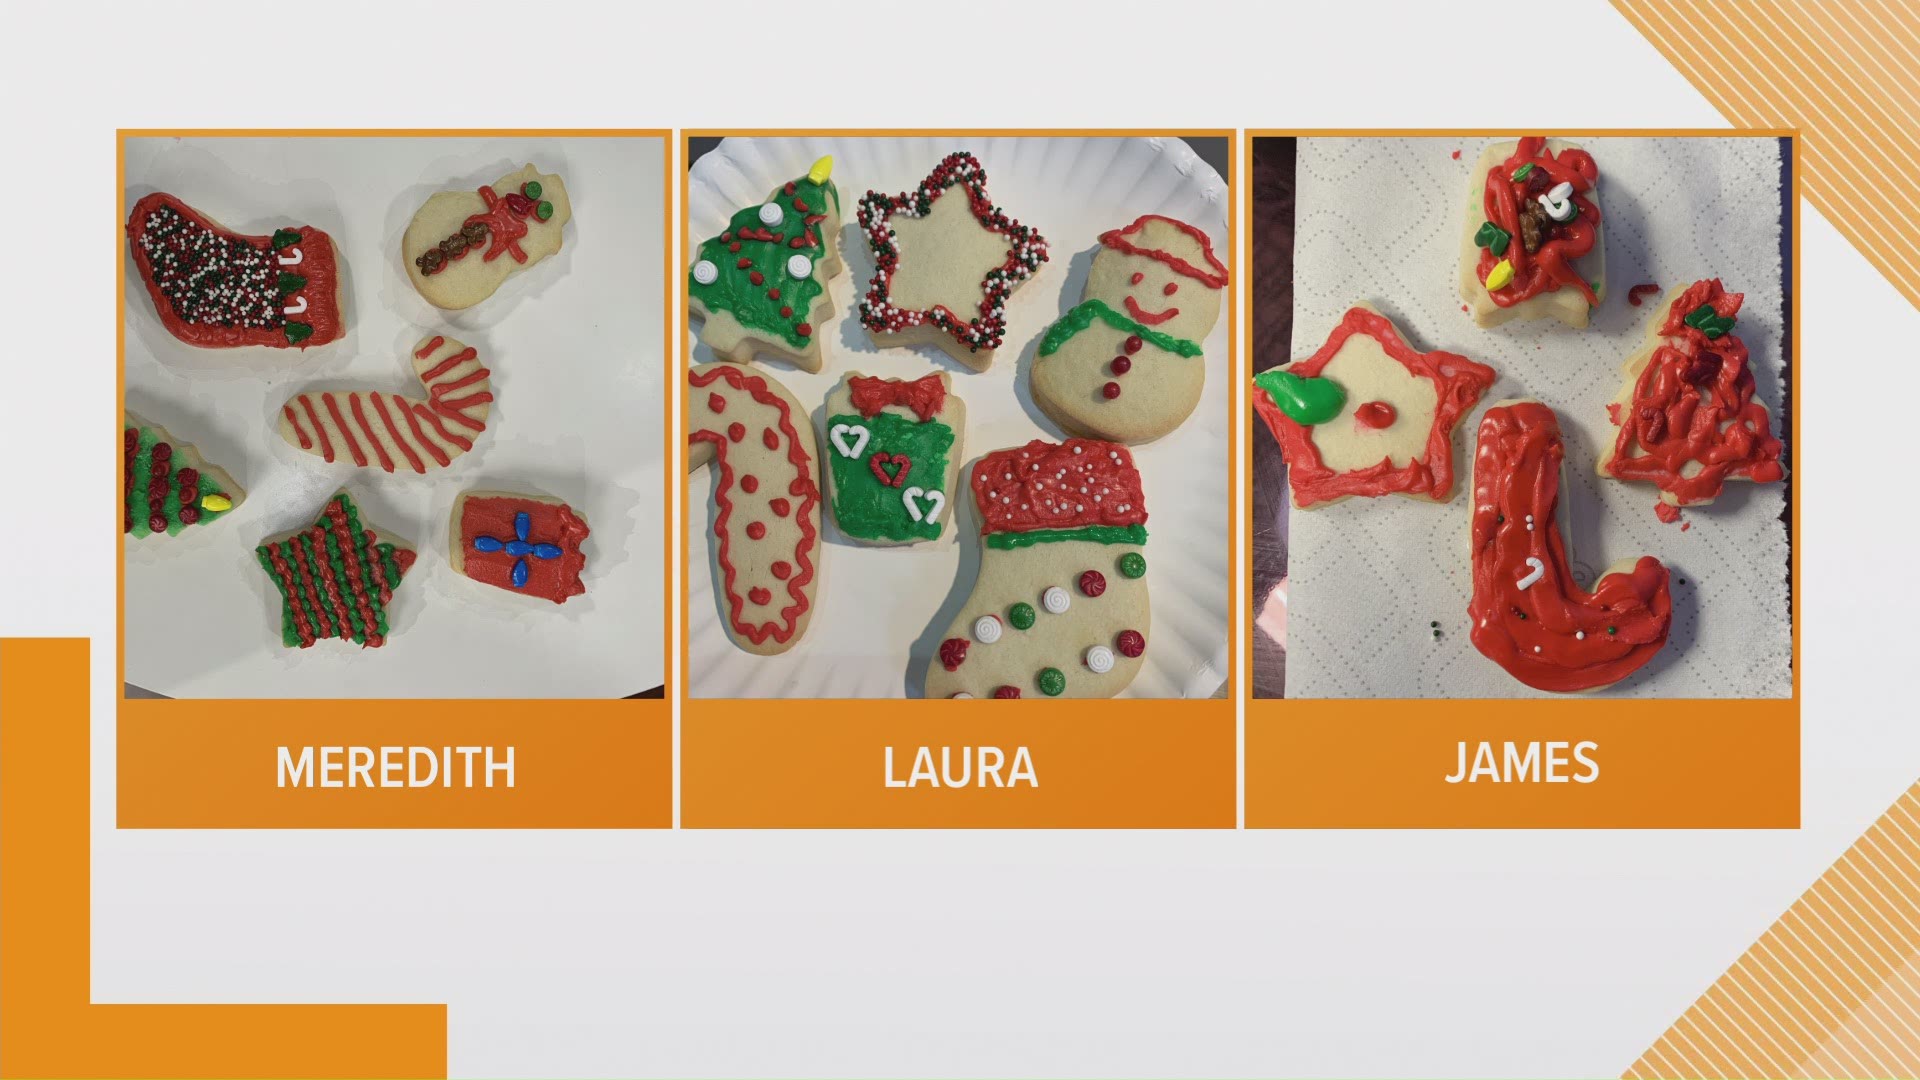 We put James, Laura, and Meredith head-to-head-to-head in a cookie challenge to see who would win the bragging rights!